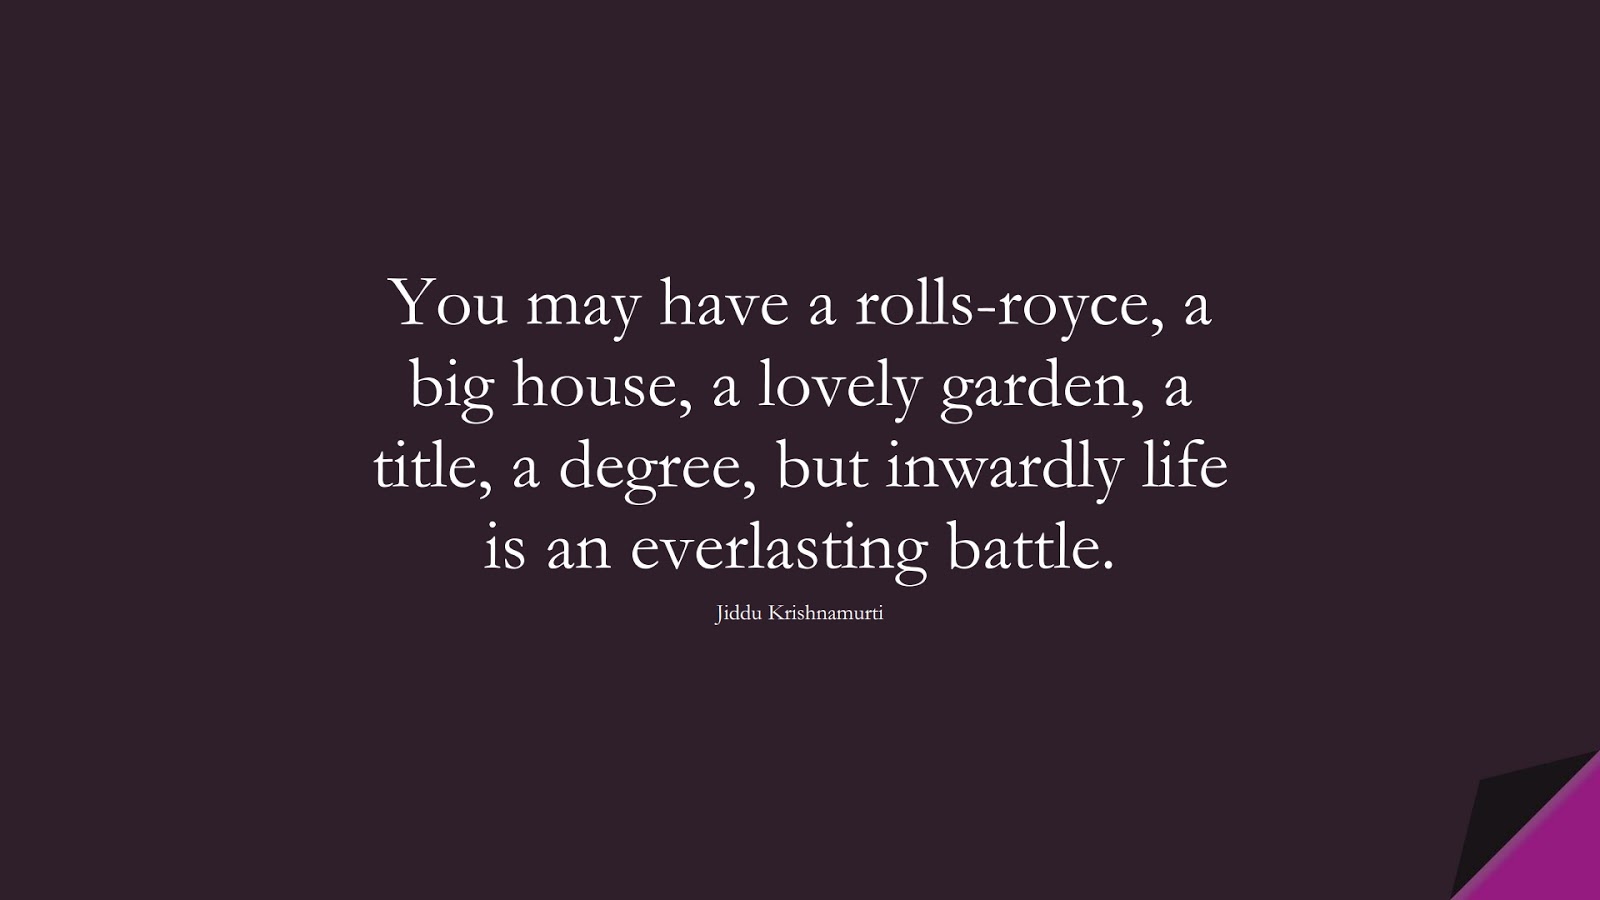 You may have a rolls-royce, a big house, a lovely garden, a title, a degree, but inwardly life is an everlasting battle. (Jiddu Krishnamurti);  #AnxietyQuotes